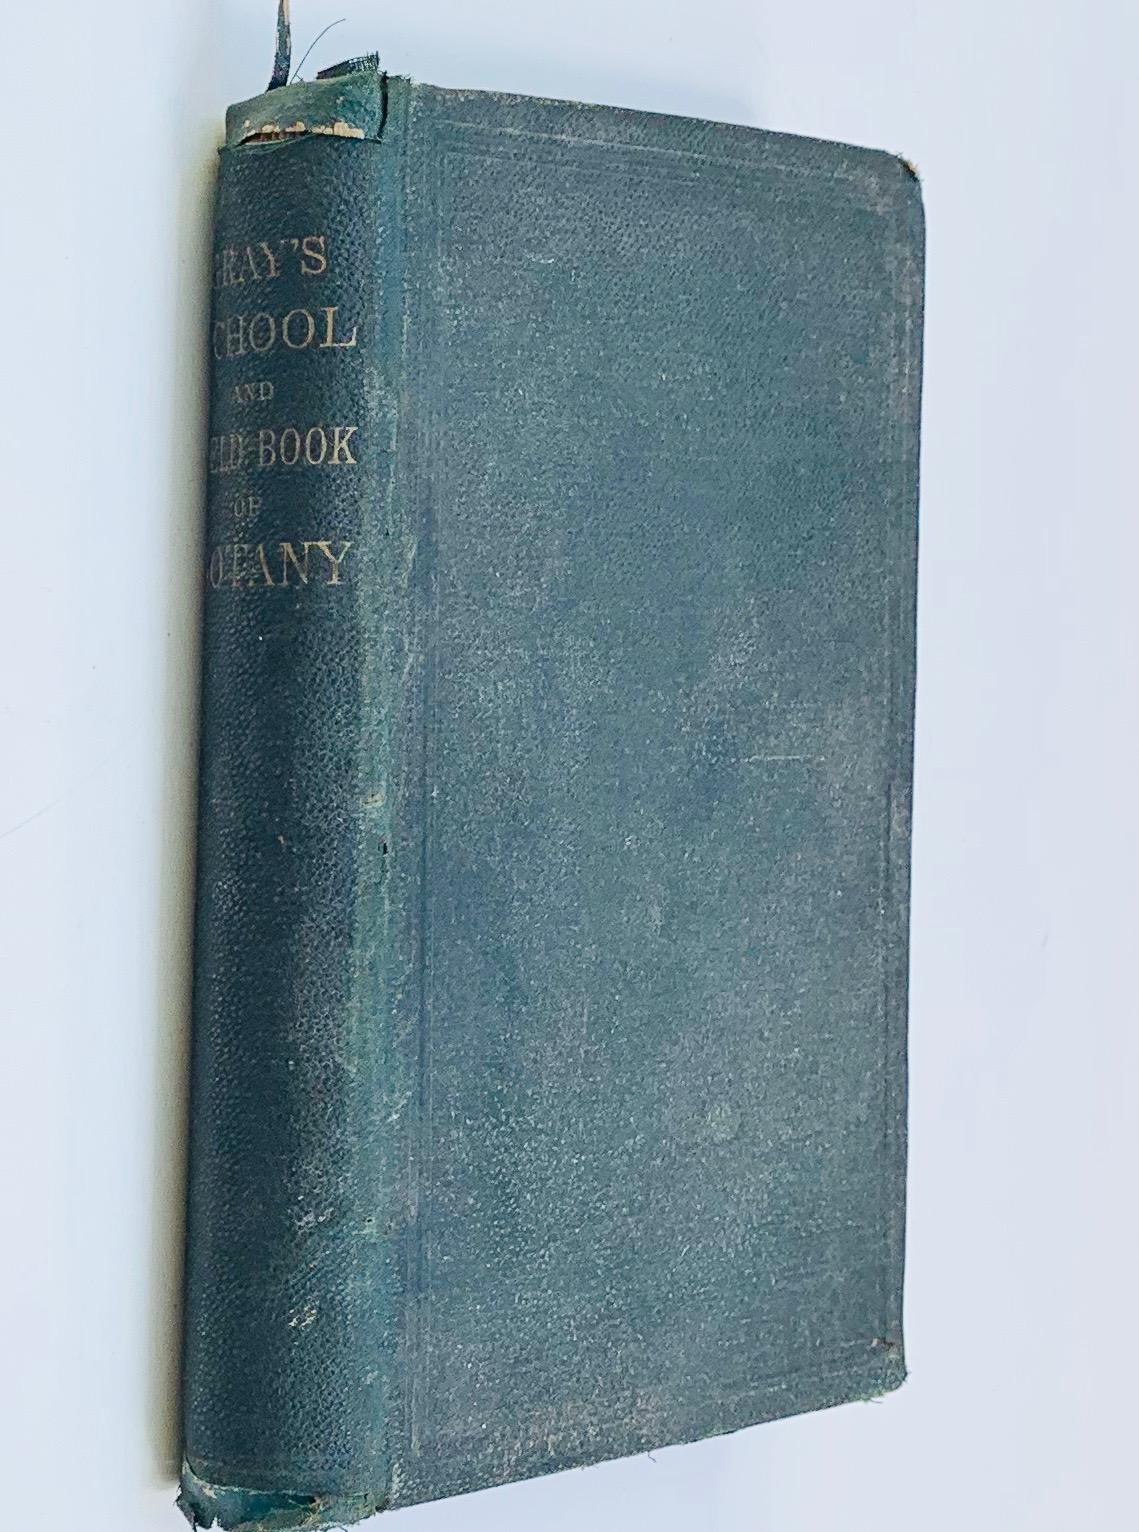 RARE Gray's School and Field book of Botany (c.1870)